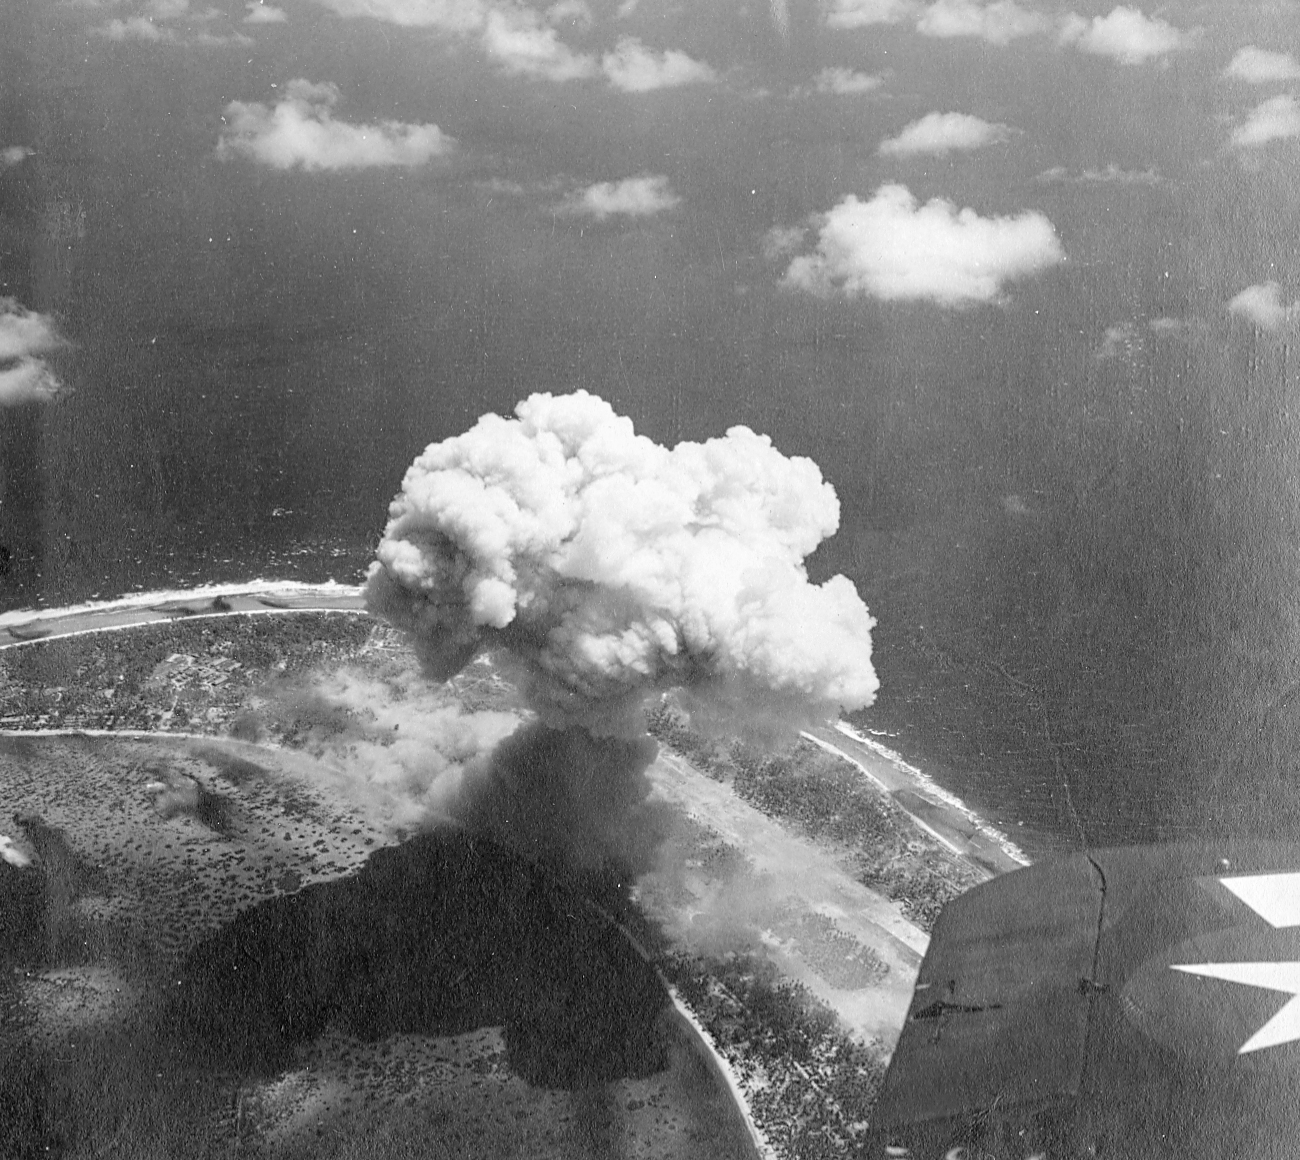 Strike photo of Kwajalein, Marshall Islands taken by aircraft from USS Enterprise, 30 Jan 1944. Note the rising mushroom cloud from the exploding Japanese ammunition dump.